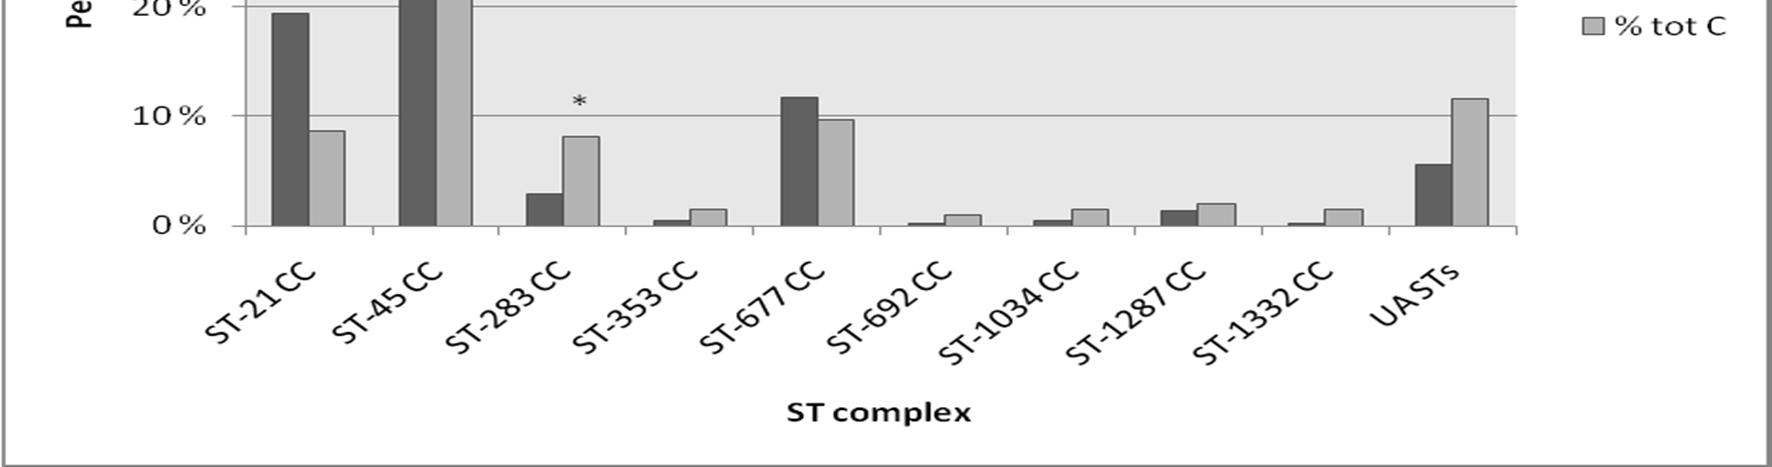 Fig. 1 Overview of the distribution of overlapping ST complexes between human (H) (n=454) and chicken (C) (n=208) isolates from 1996 to 2007 (in